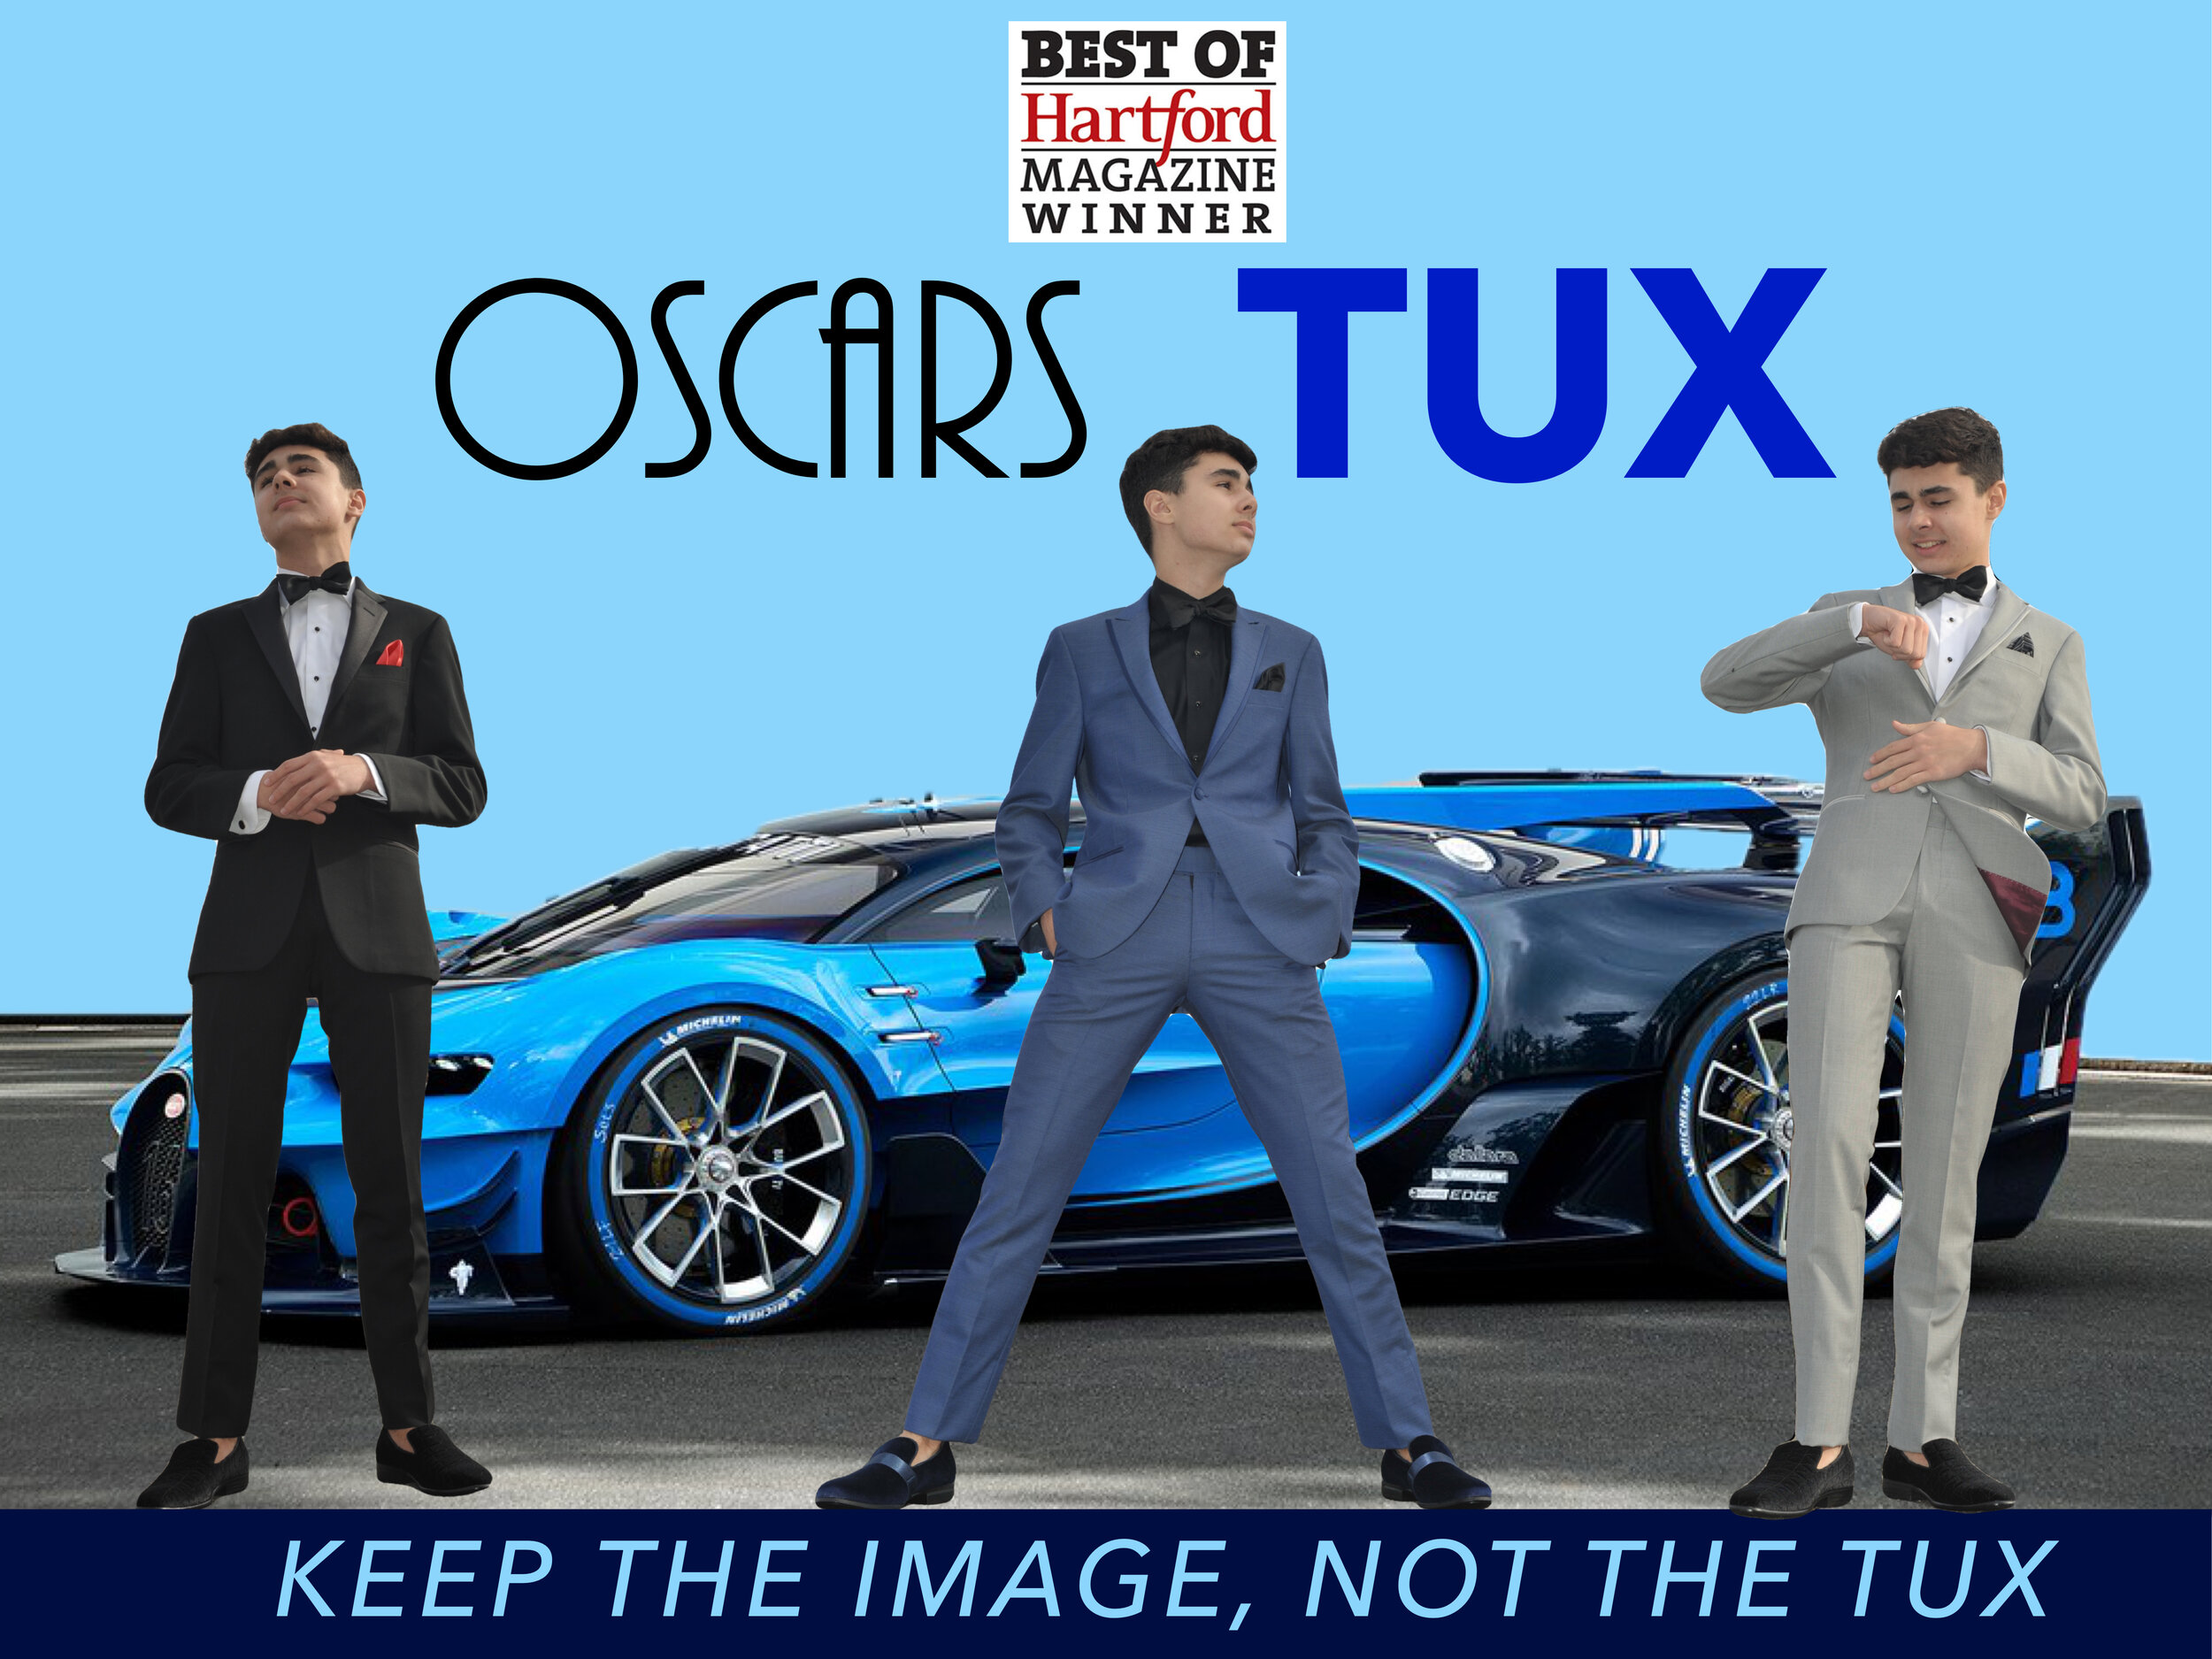 Unquestionably The Best Rental Tuxedos In The Business All Here In-Stock! - IT’S ALL HERE !!! NO NEED TO ORDER YOUR TUXEDOS…No Stores Offer Anything Close Because We Offer Our Own Specially Made Exclusive and Fitted Tuxedo Styles